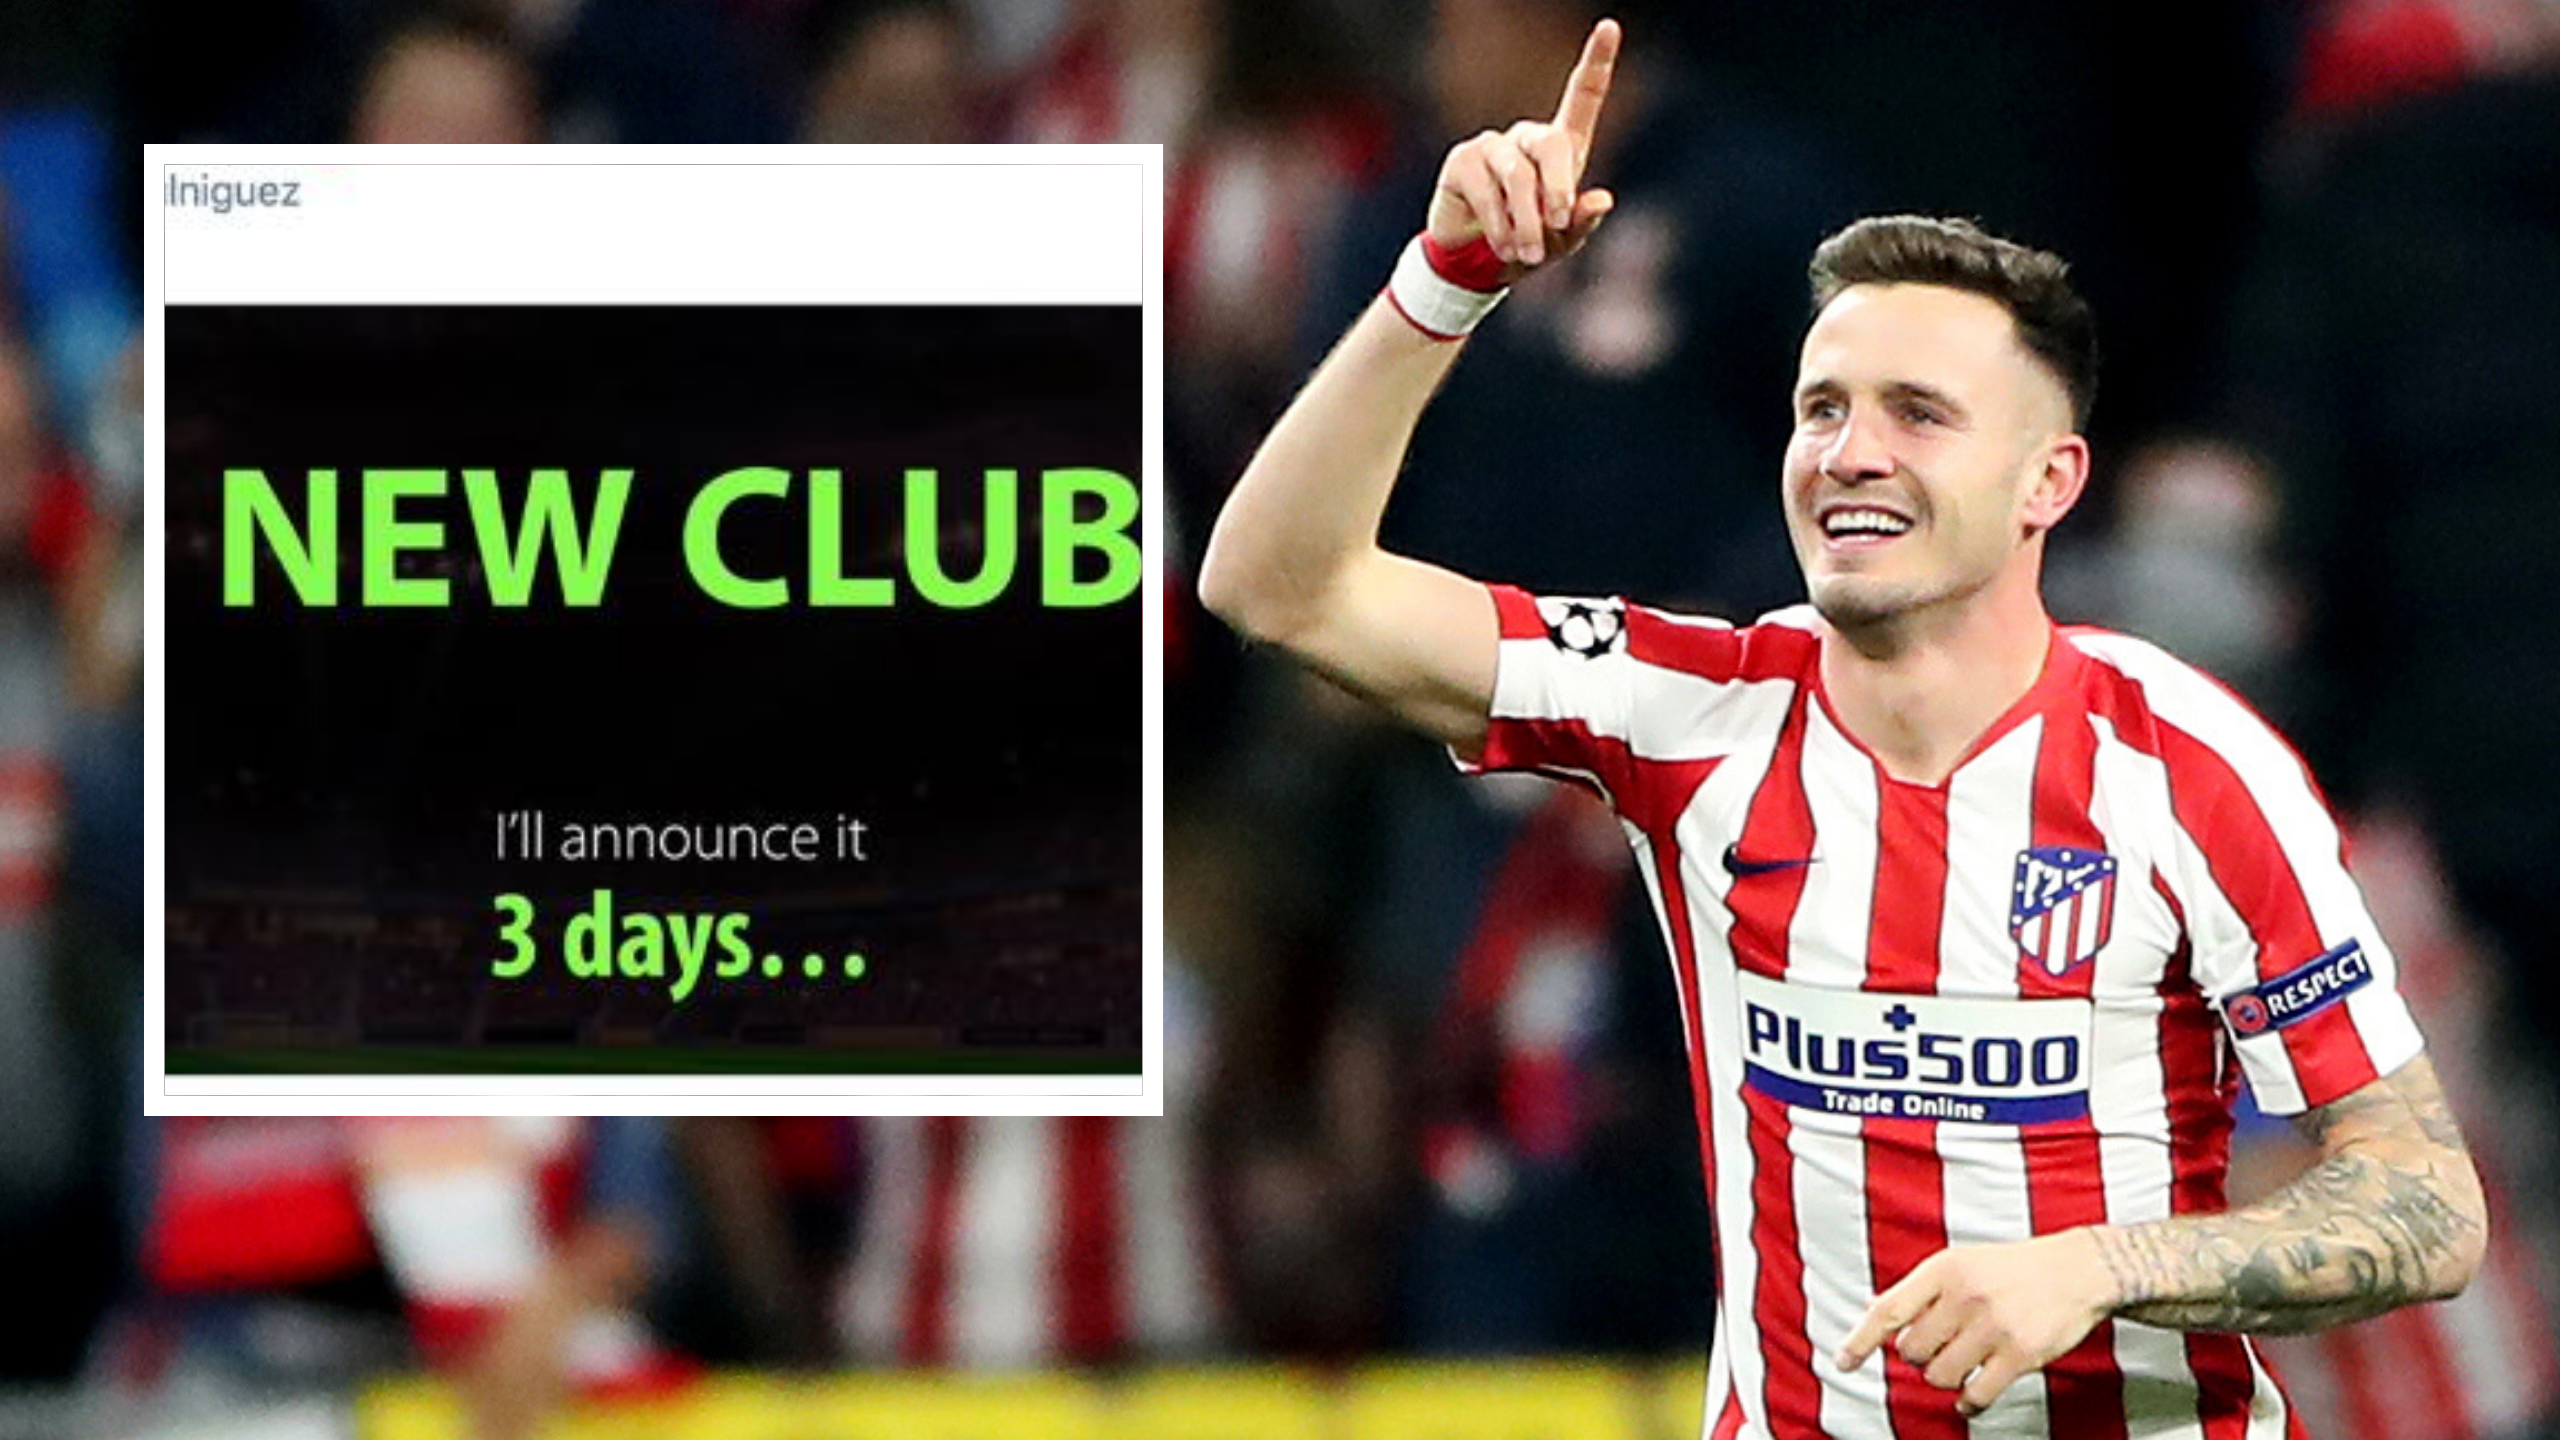 Atletico Madrid's Saul Niguez Says He Will Announce His 'New Club' In Three Days